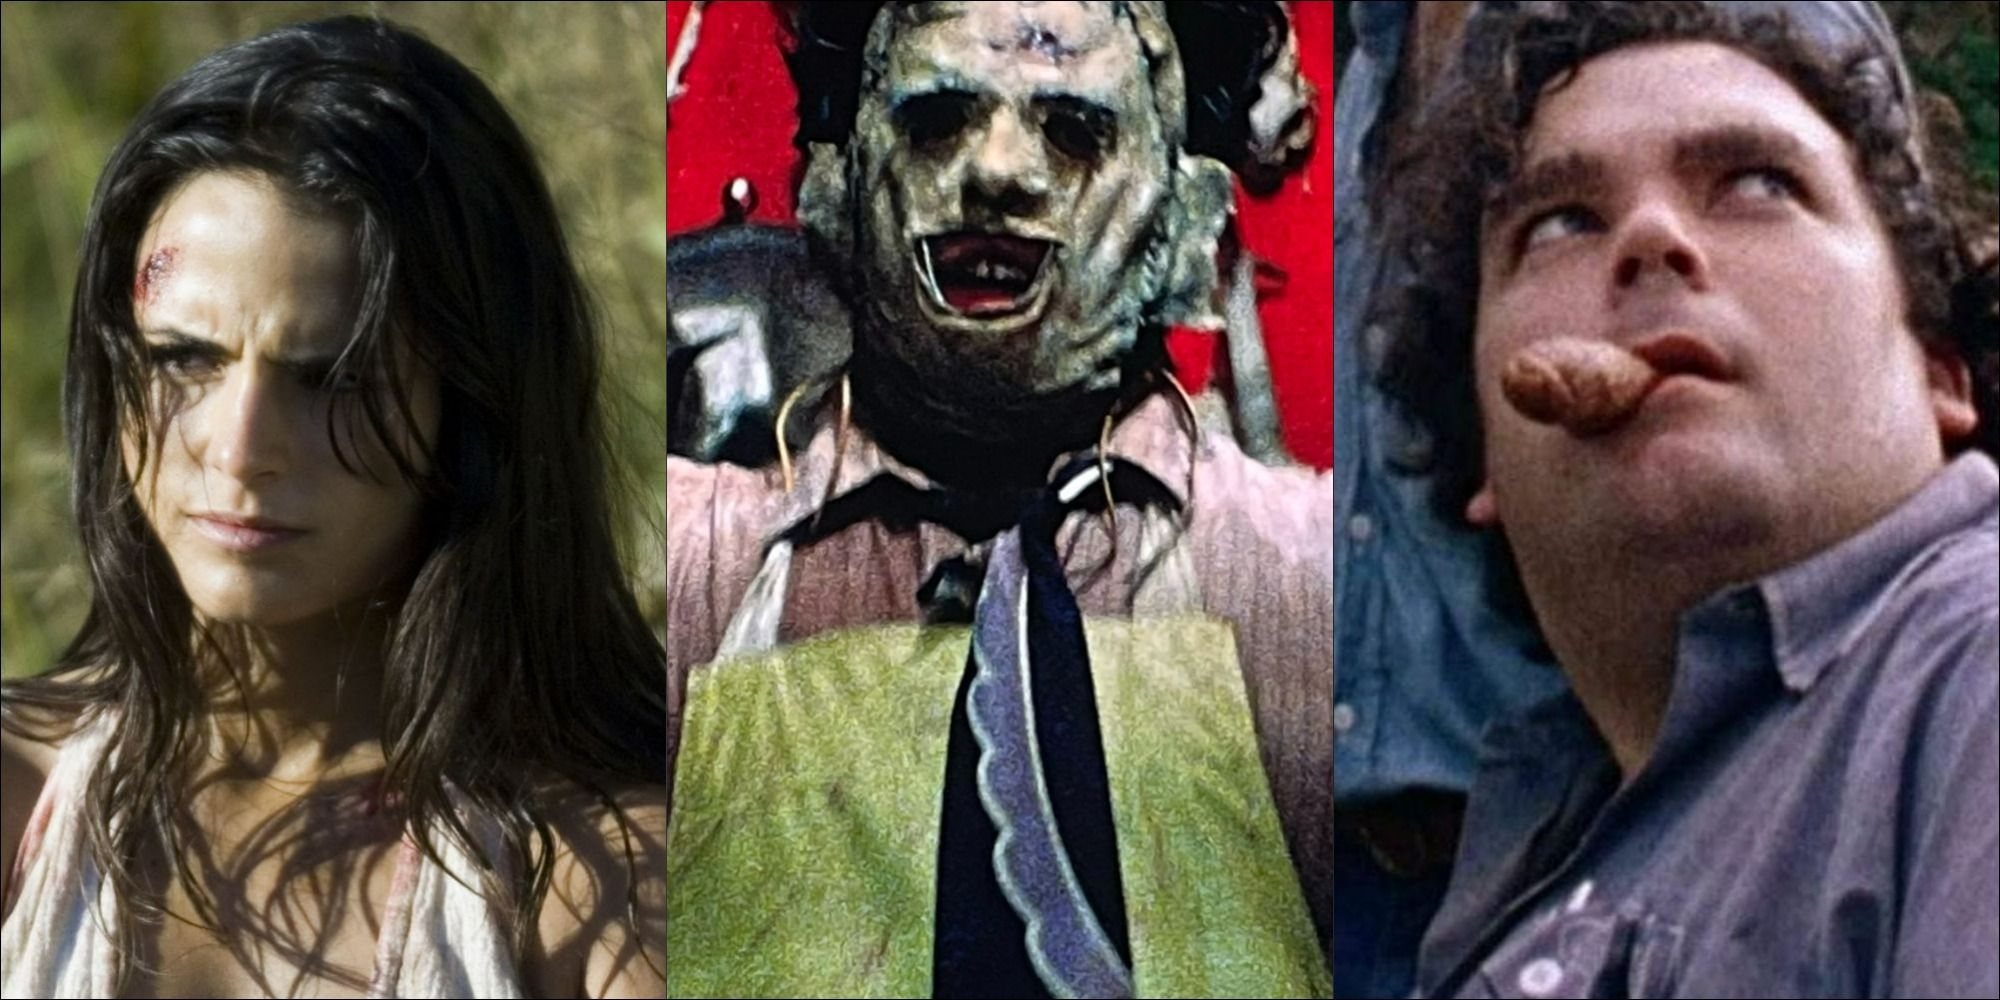 Leatherface and two of his victims from The Texas Chain Saw Massacre